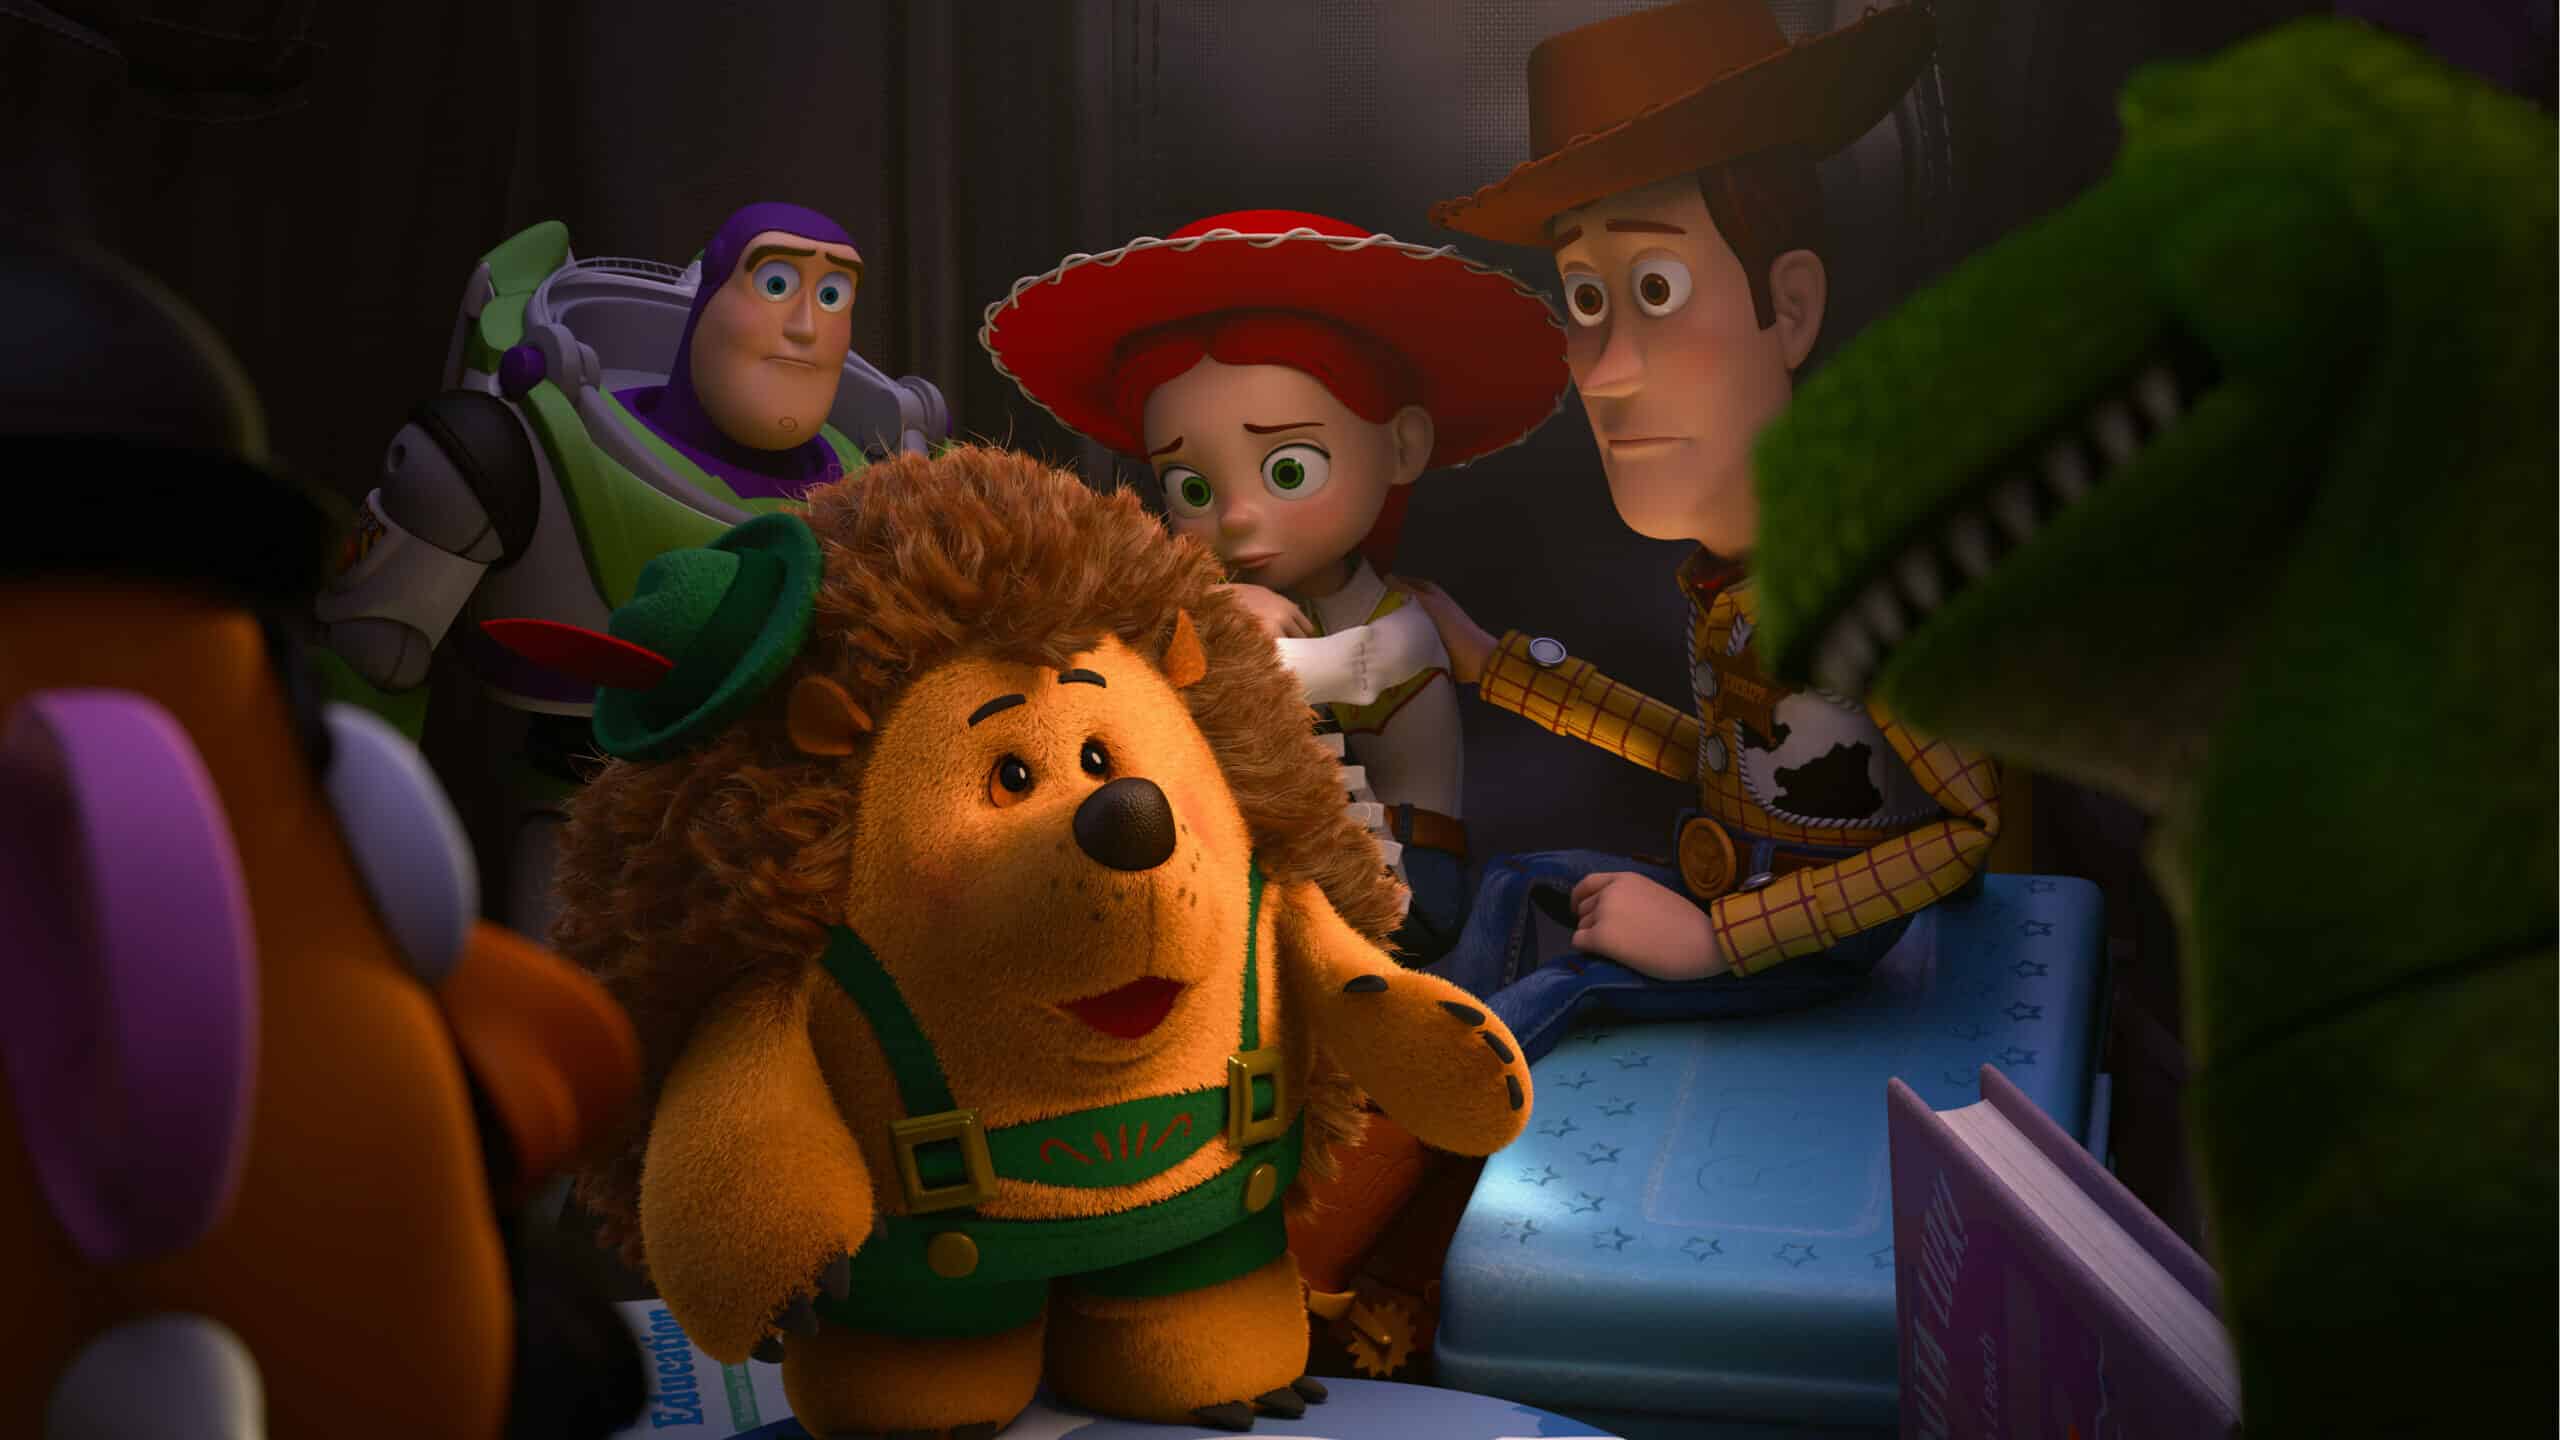 Toy Story 5 isn't planned, but it 'wouldn't surprise' star Tom